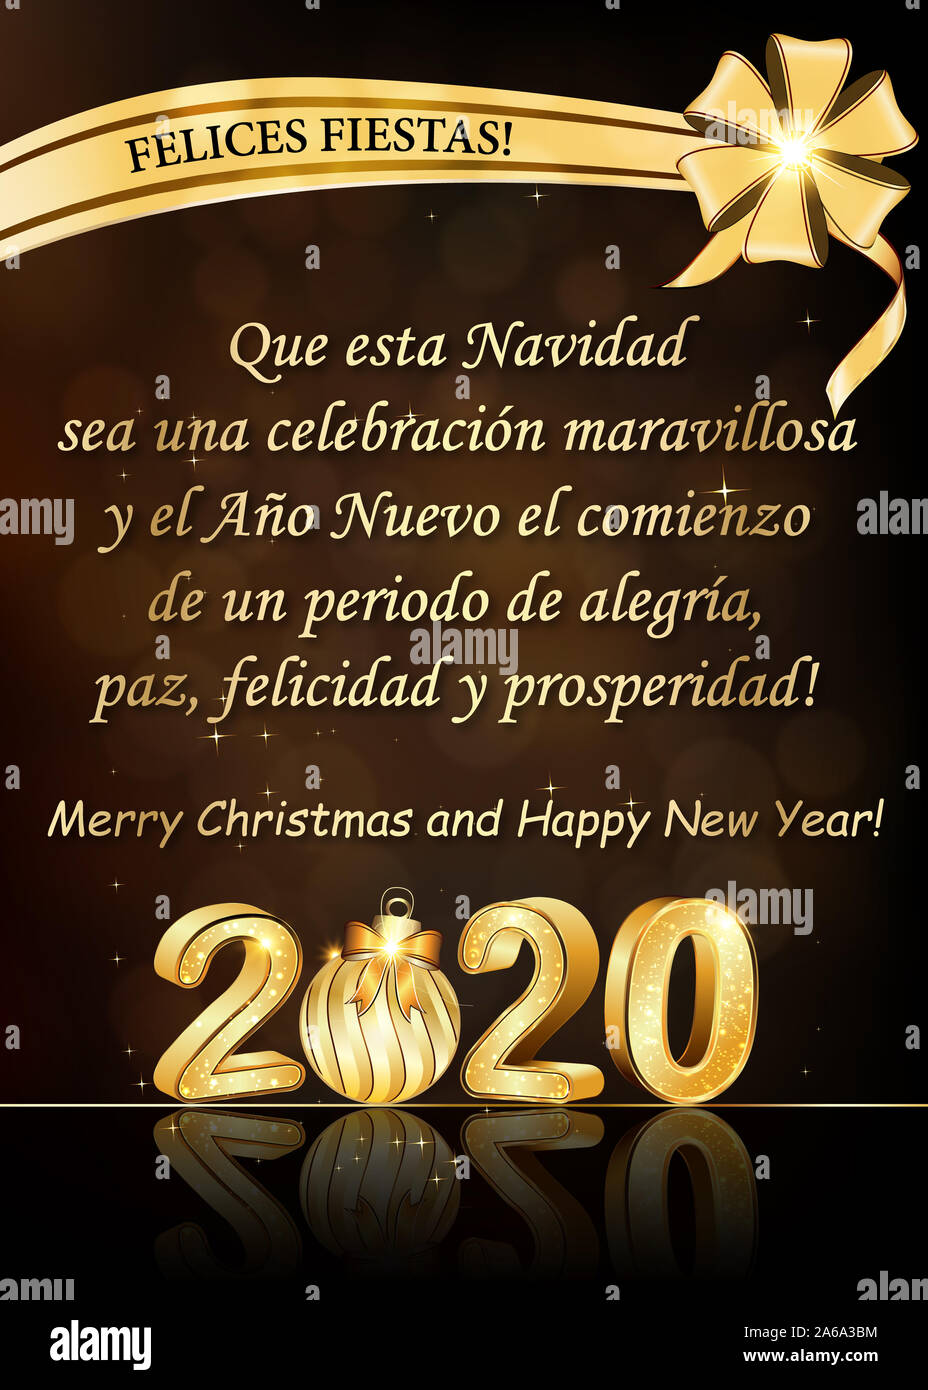 Spanish Greetings May This Christmas Be A Wonderful Celebration And The New Year The Beginning Of A Period Of Joy Peace Happiness And Prosperity Stock Photo Alamy